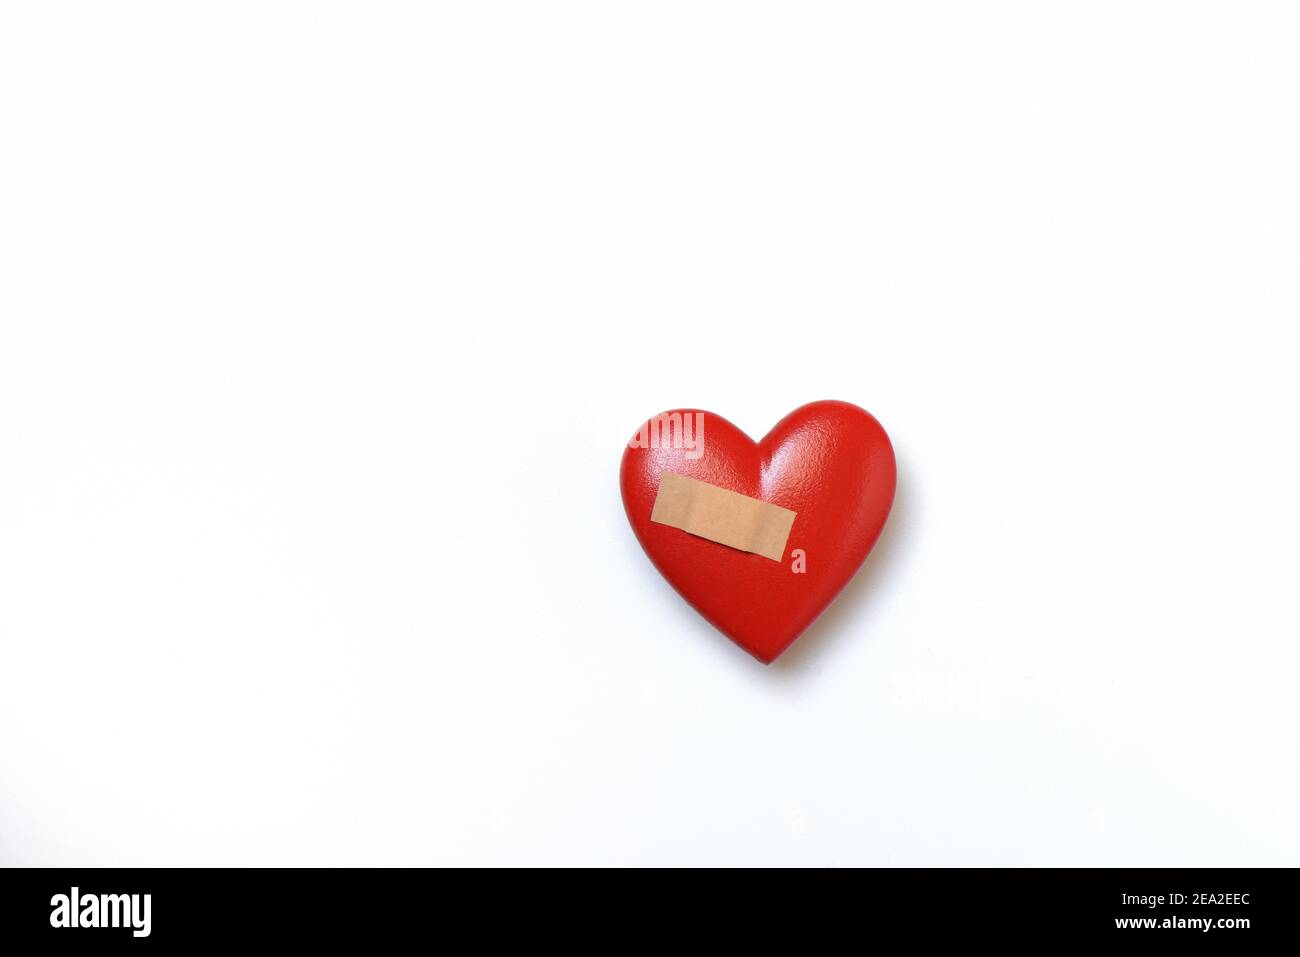 Heart with adhesive plaster, red heart Stock Photo